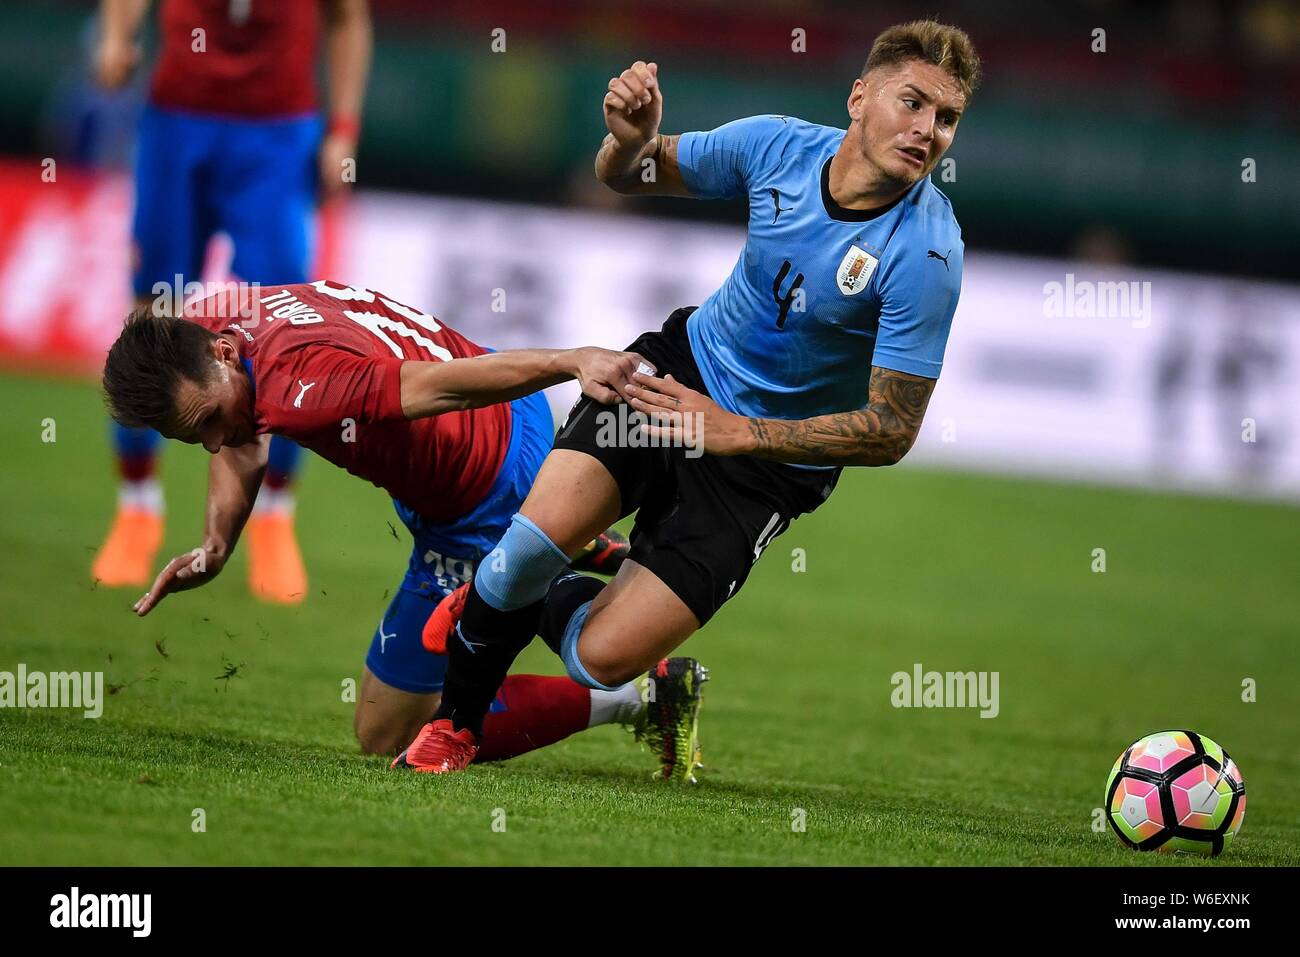 A player of Czech Republic national football team challenges Guillermo Varela, right, of Uruguay national football team in their semi-final match duri Stock Photo